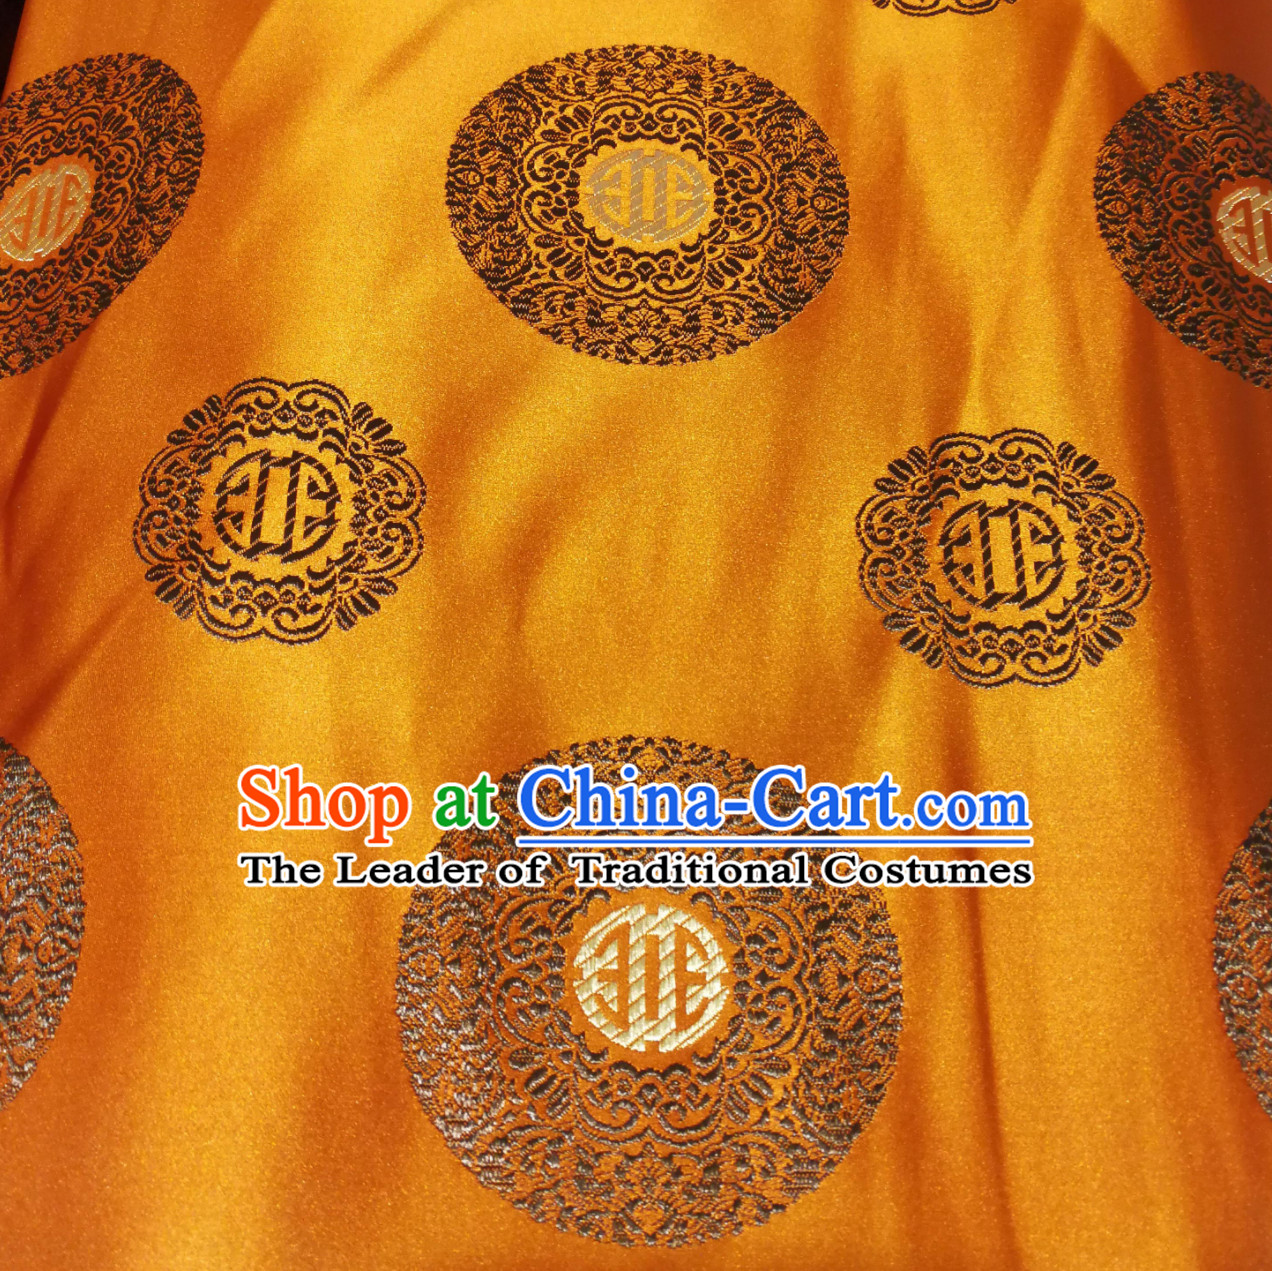 Yellow Color Chinese Royal Palace Style Traditional Pattern Design Brocade Fabric Silk Fabric Chinese Fabric Asian Material